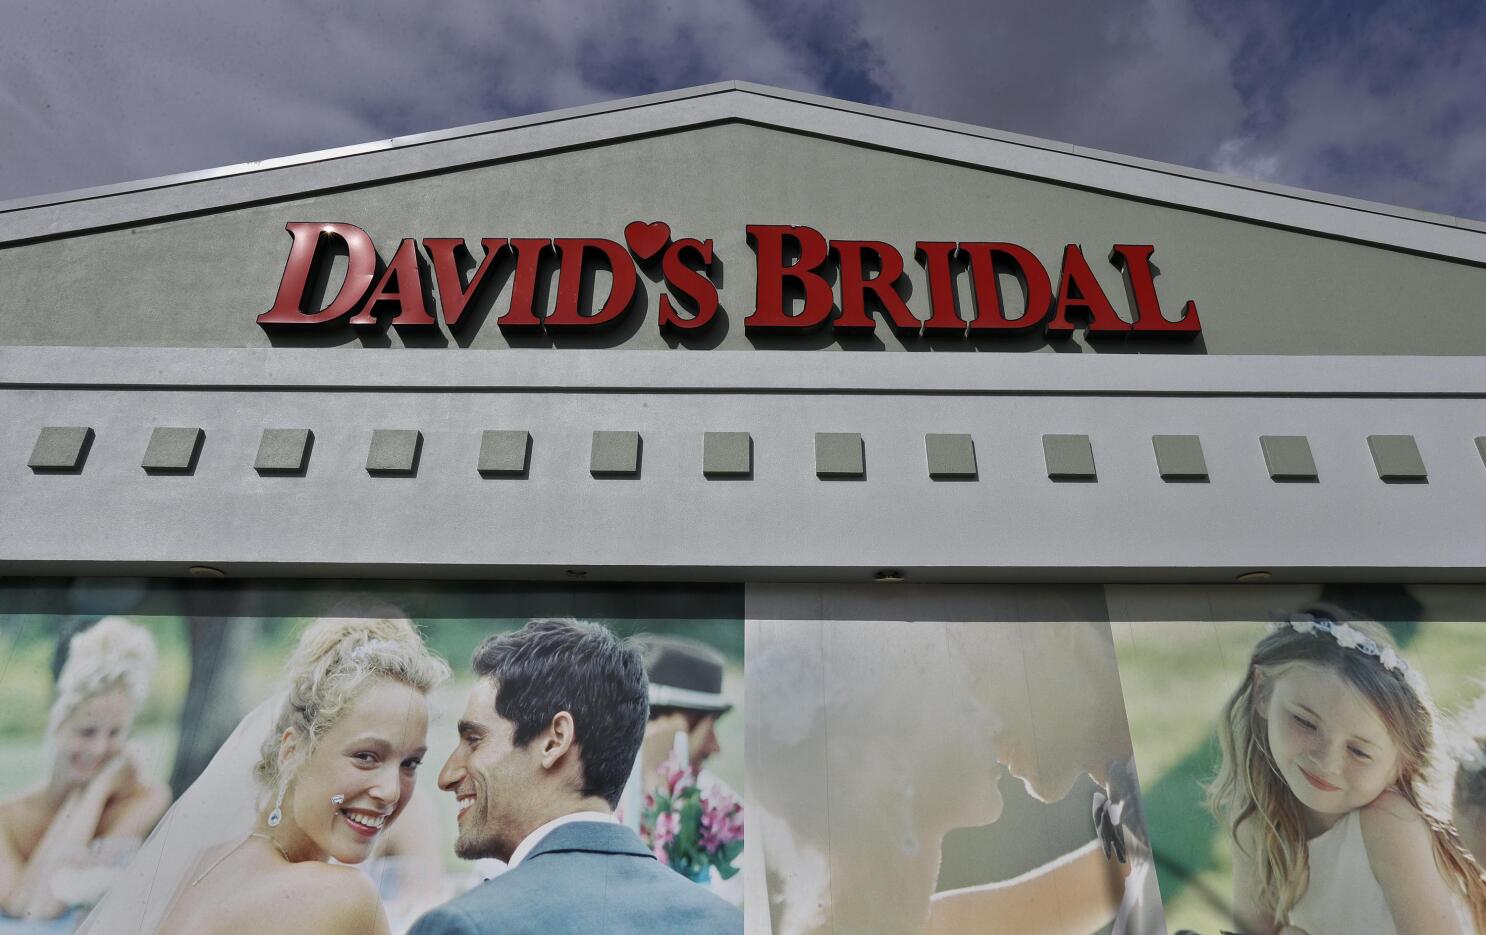 David's Bridal files for bankruptcy, but your order is safe